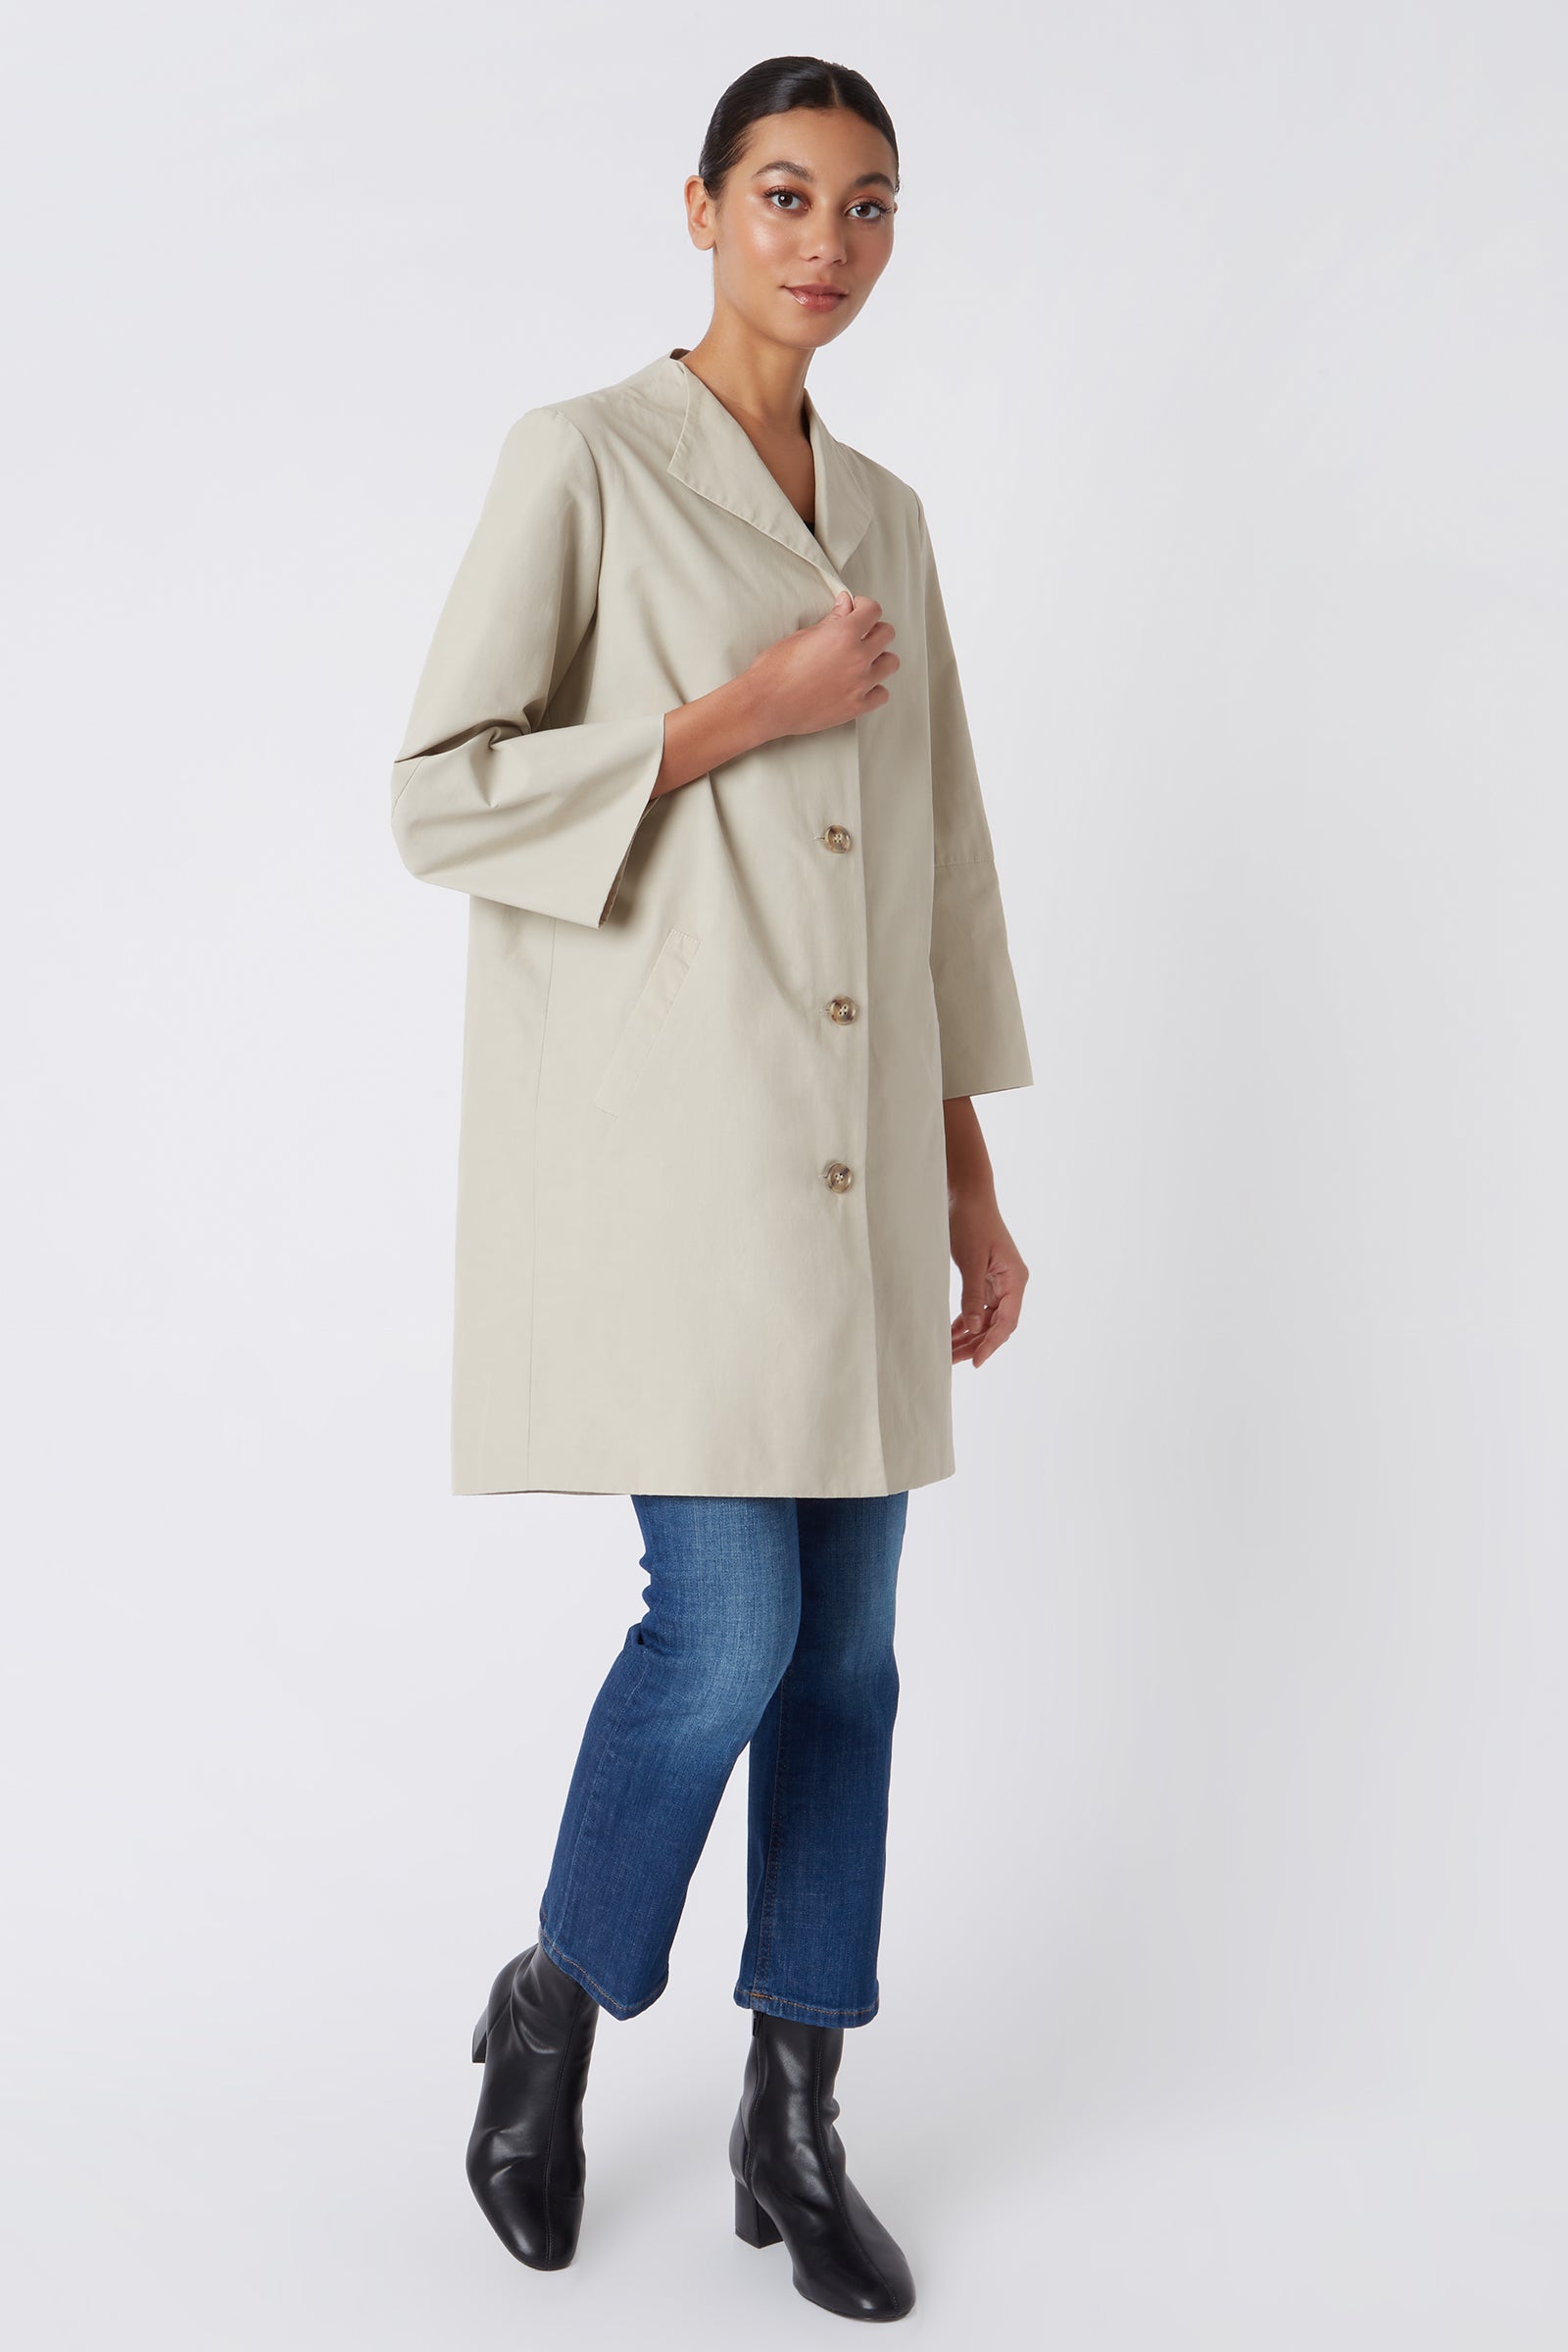 Kal Rieman Else Peacoat in Classic Khaki on Model with Hand on Coat Full Front View